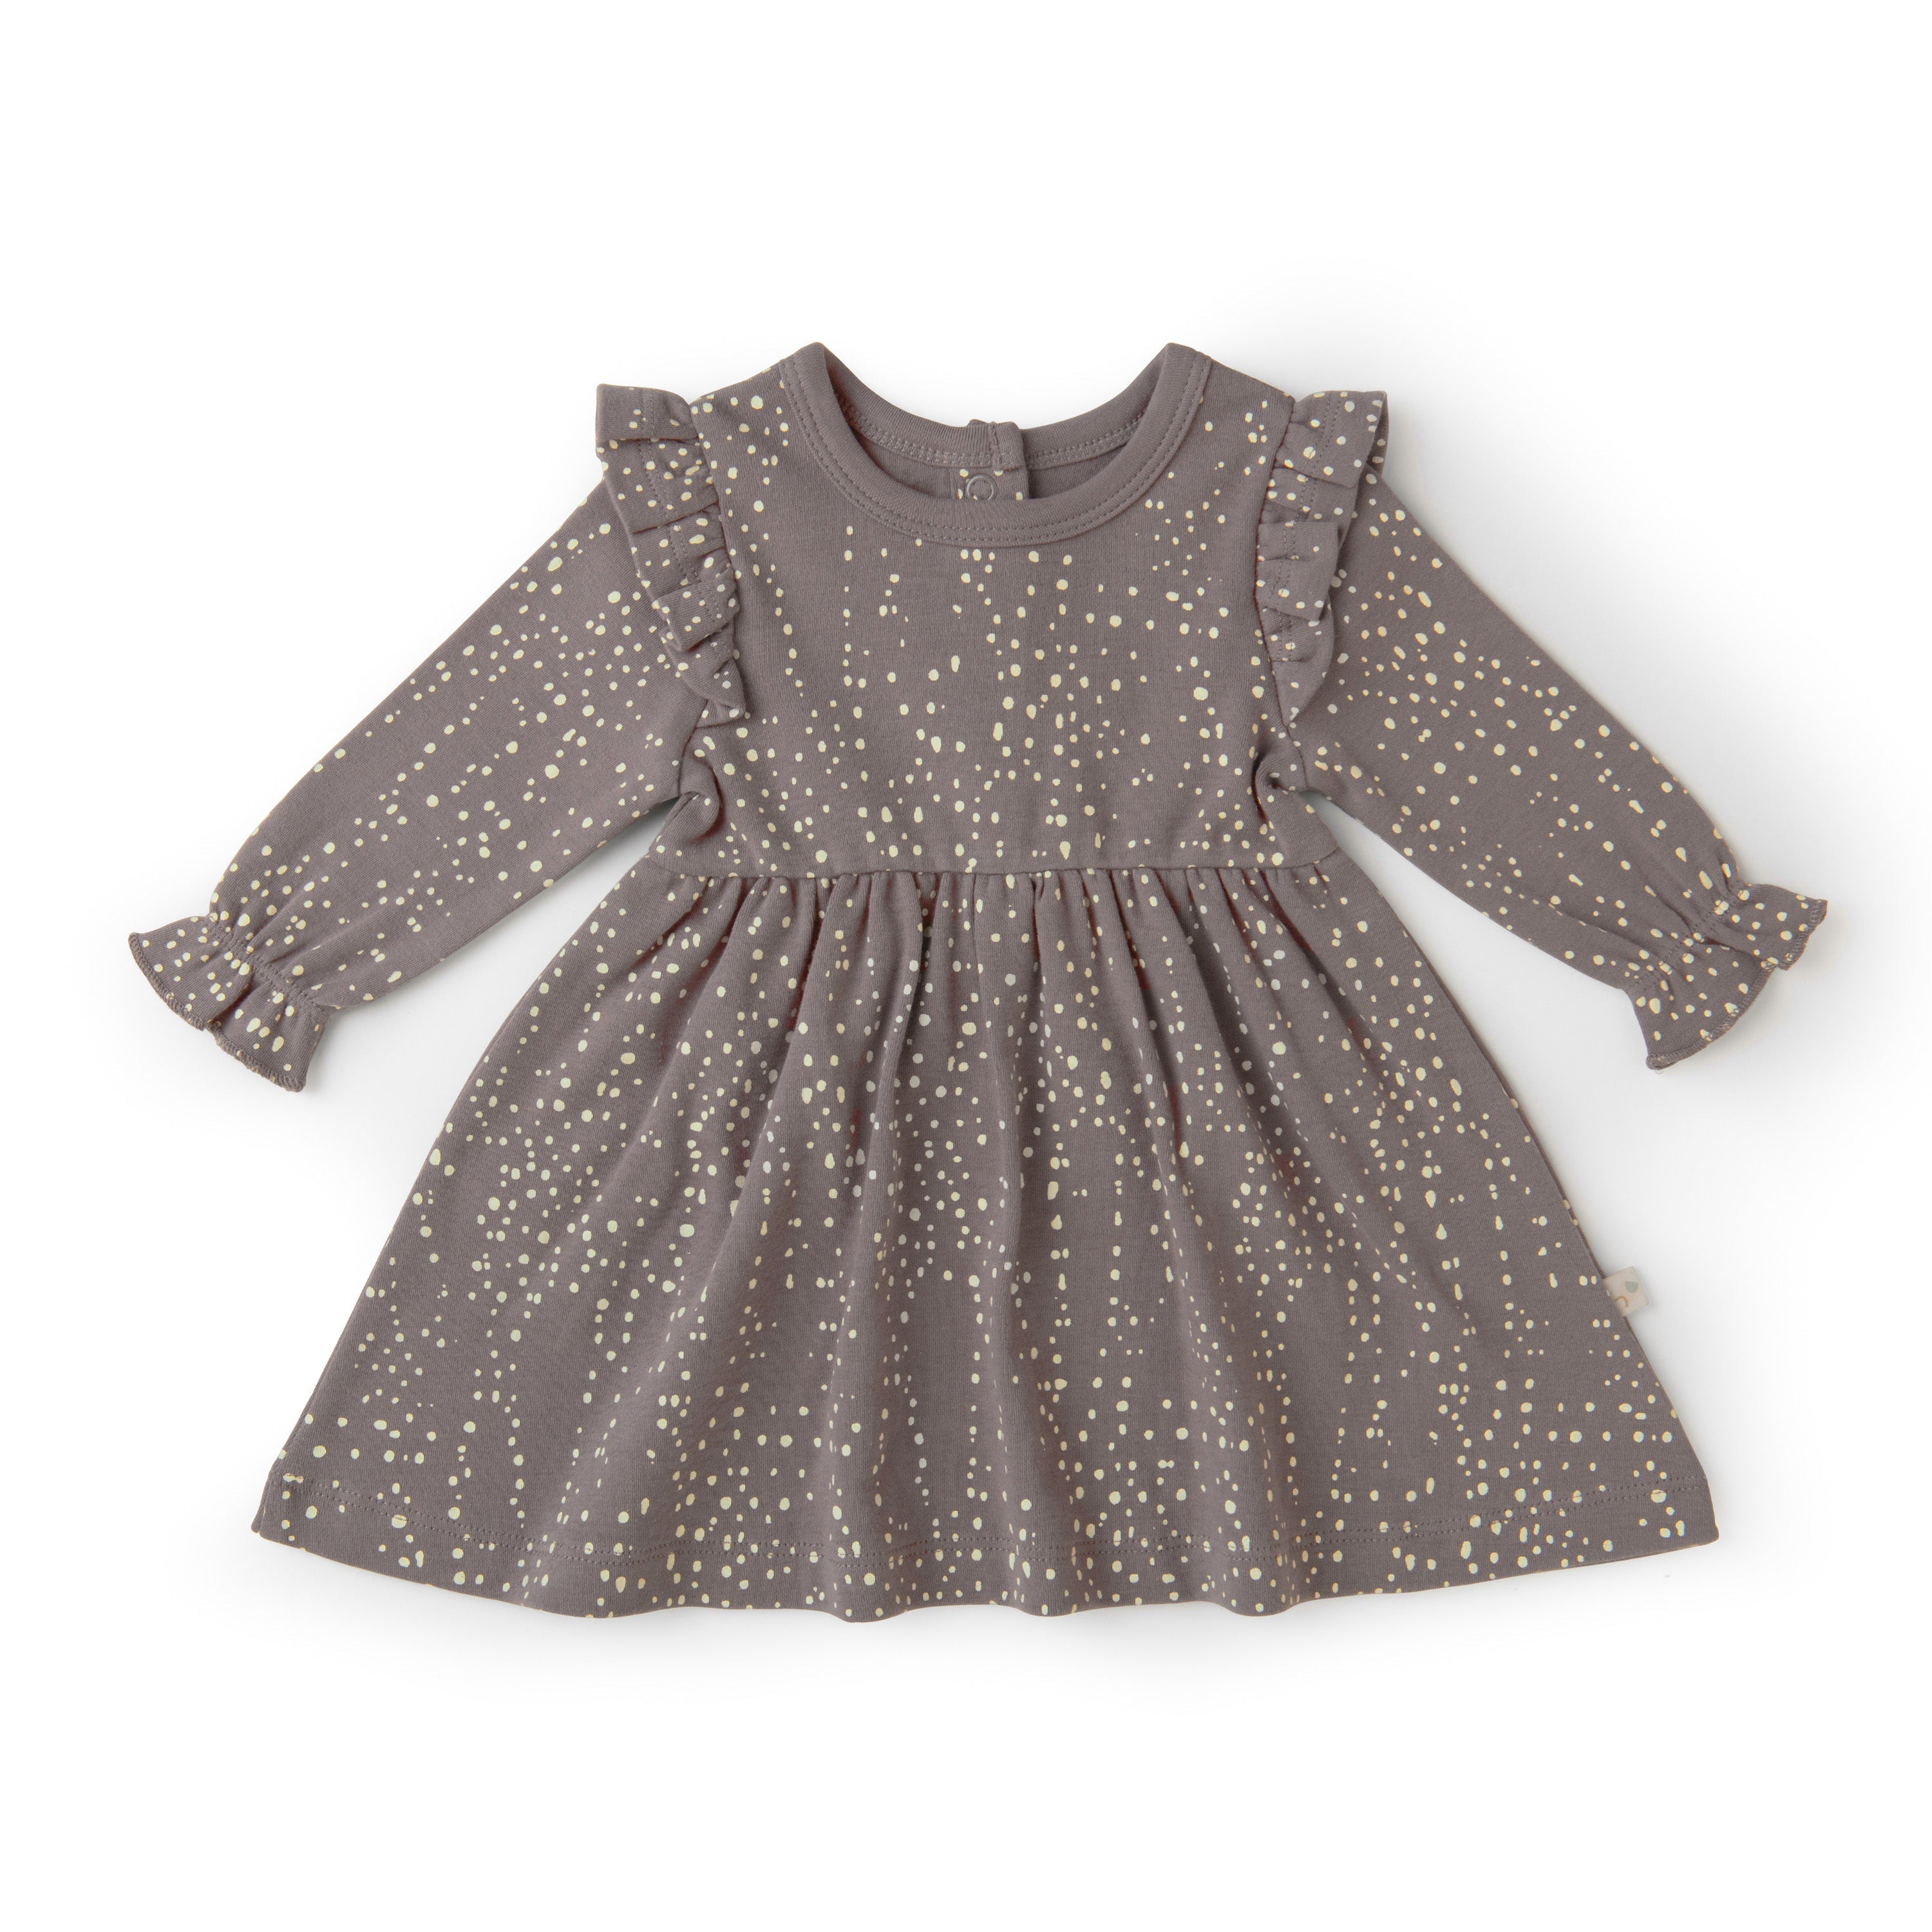 An Organic Girls gray toddler dress with long sleeves, adorned with small, gold polka dots, featuring ruffle details on the shoulders, displayed on a plain white background.